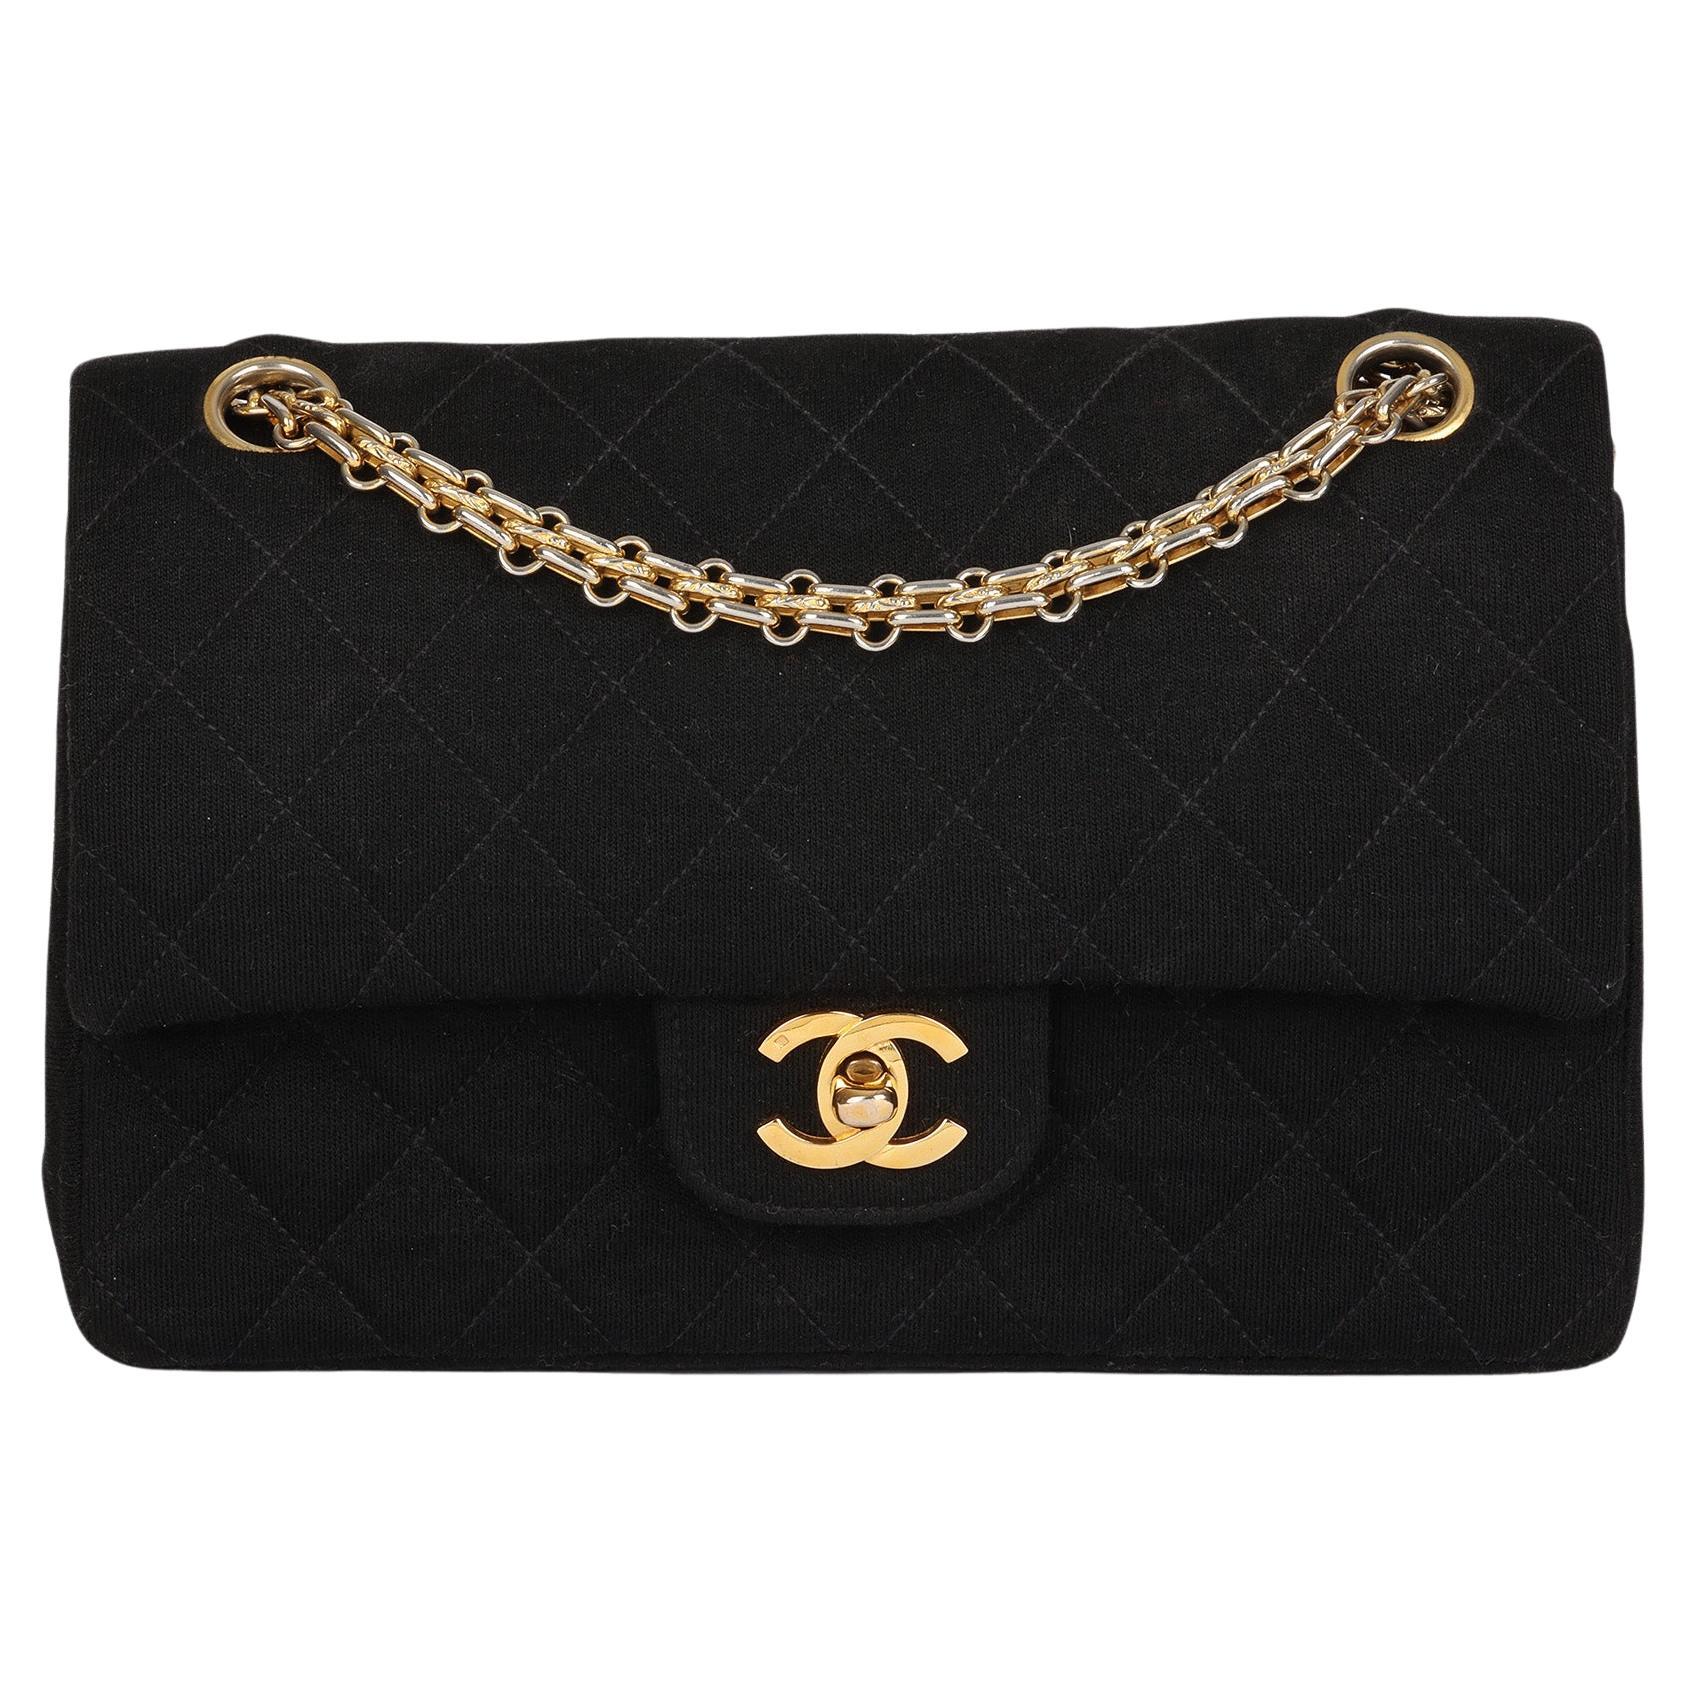 Chanel BLACK QUILTED JERSEY VINTAGE SMALL CLASSIC DOUBLE FLAP BAG